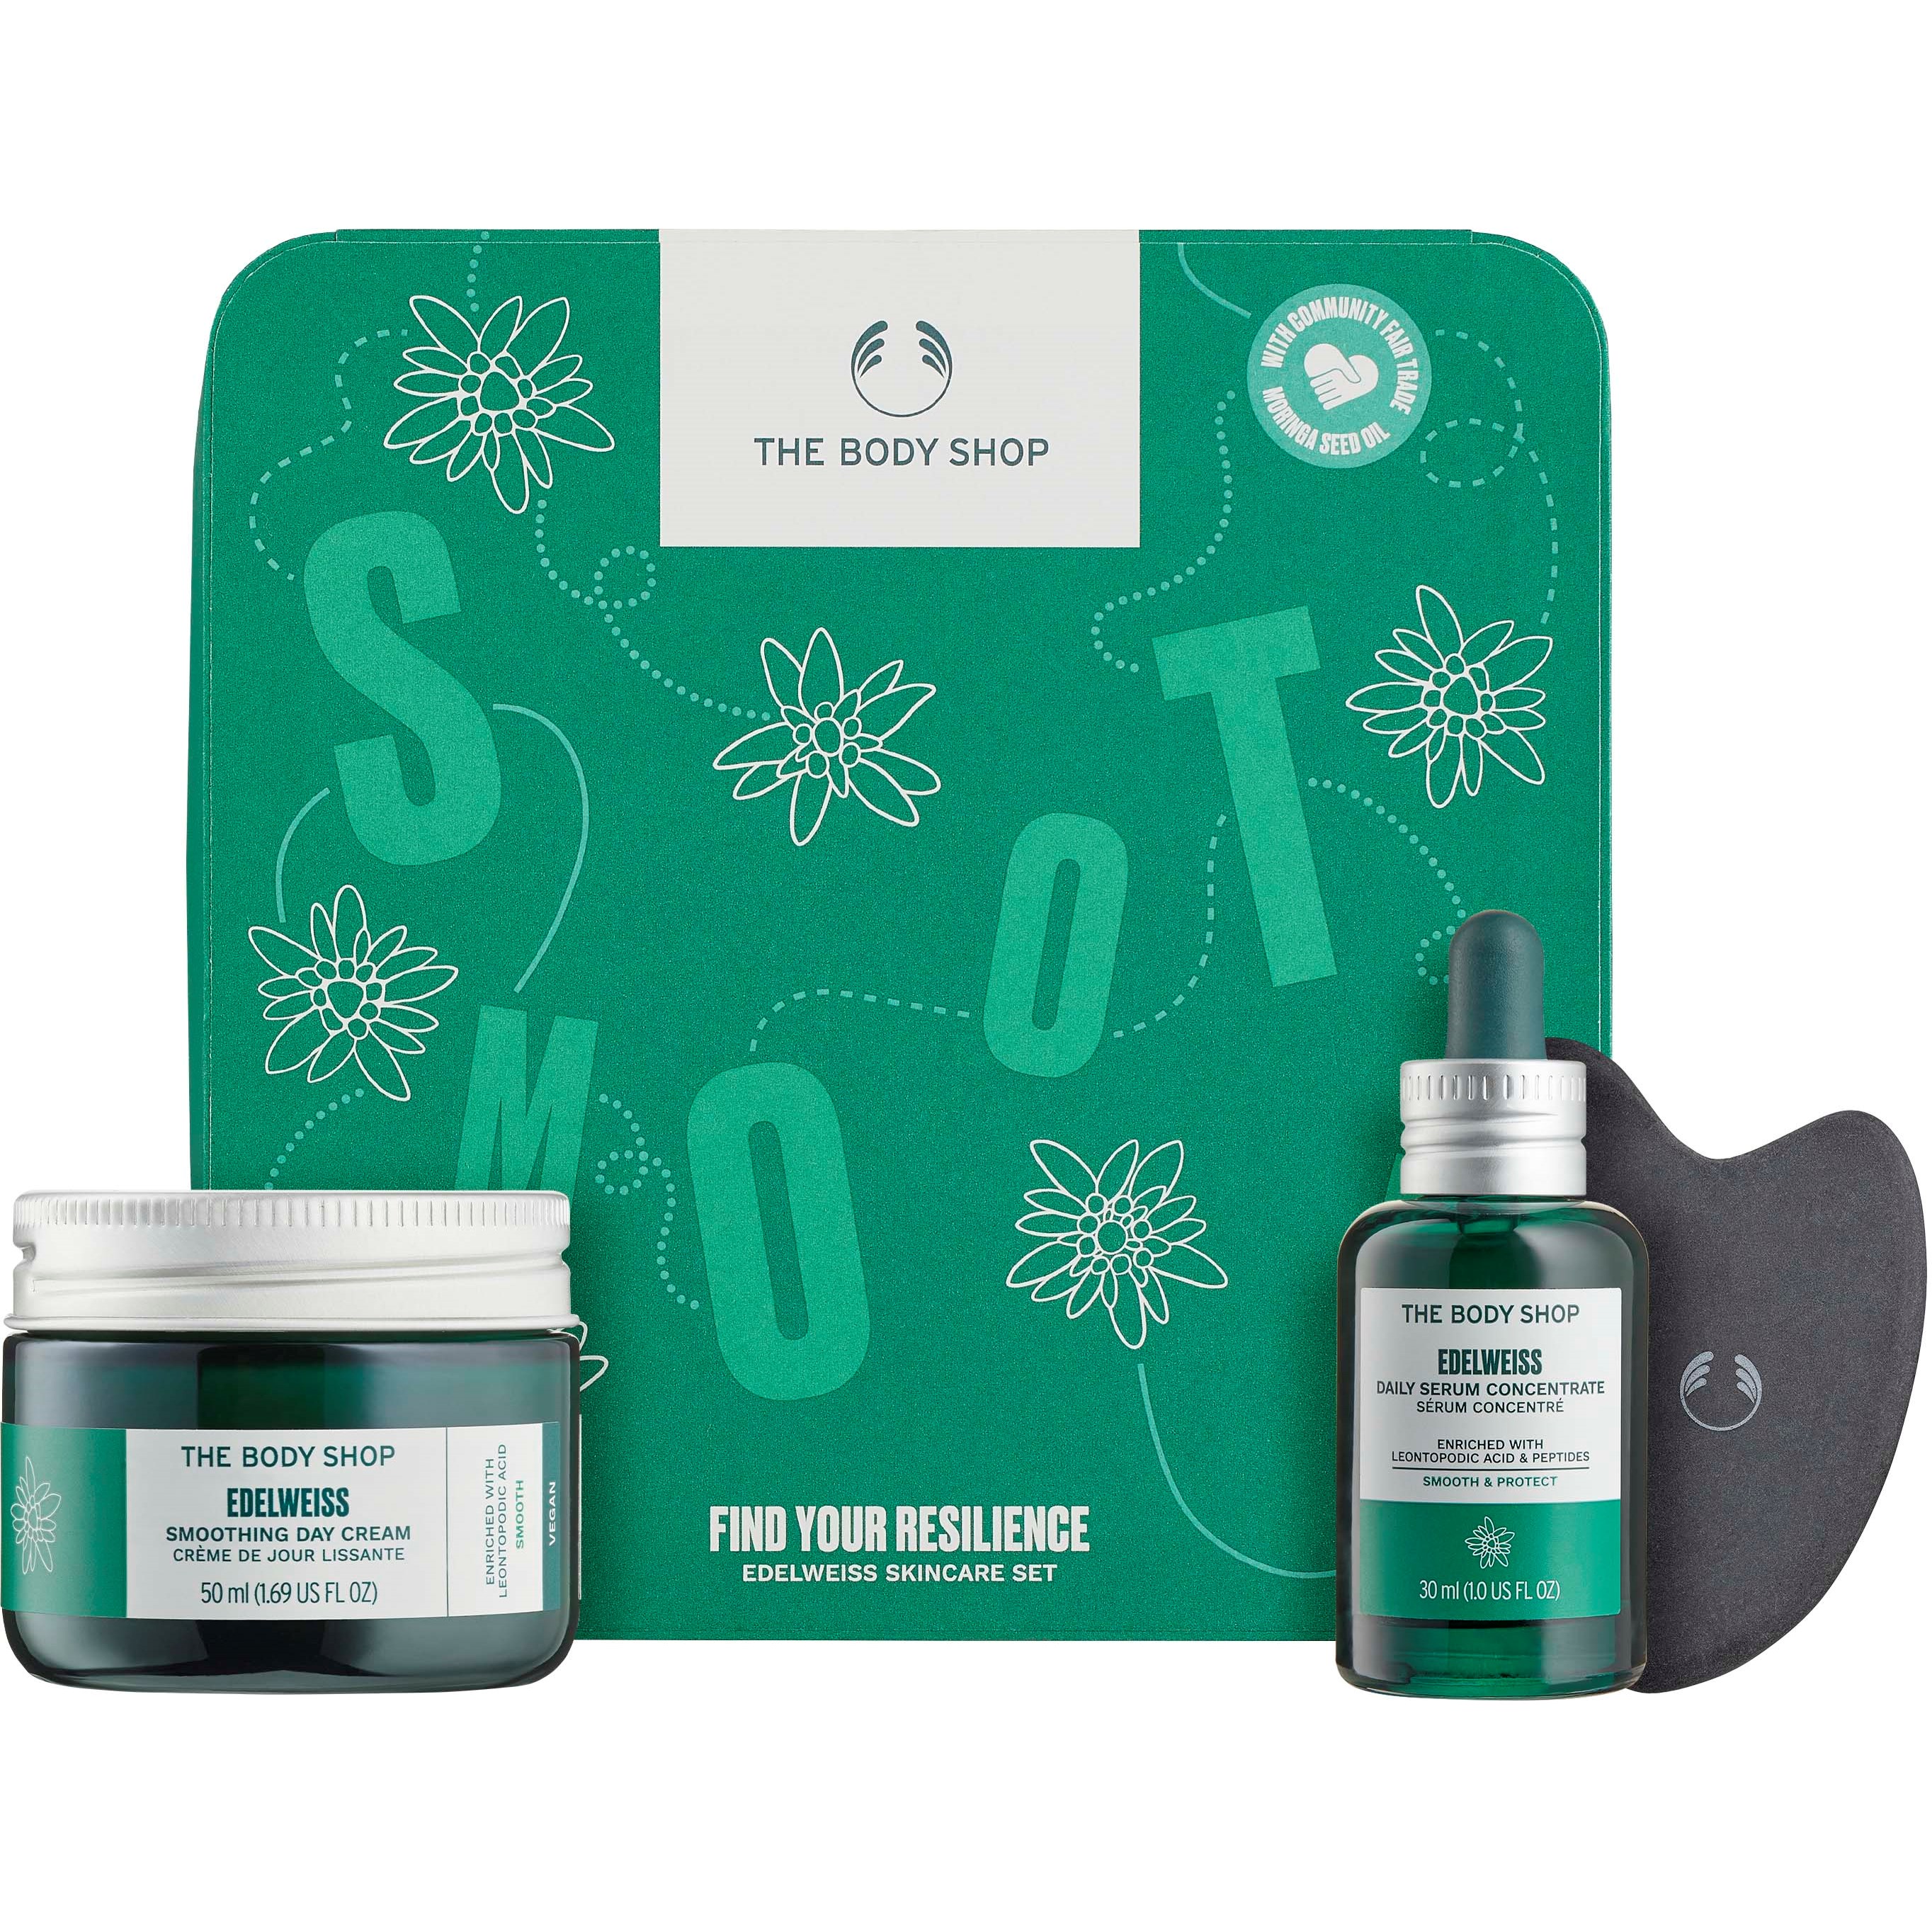 The Body Shop Edelweiss Find Your Resilience Edelweiss Skincare Gift